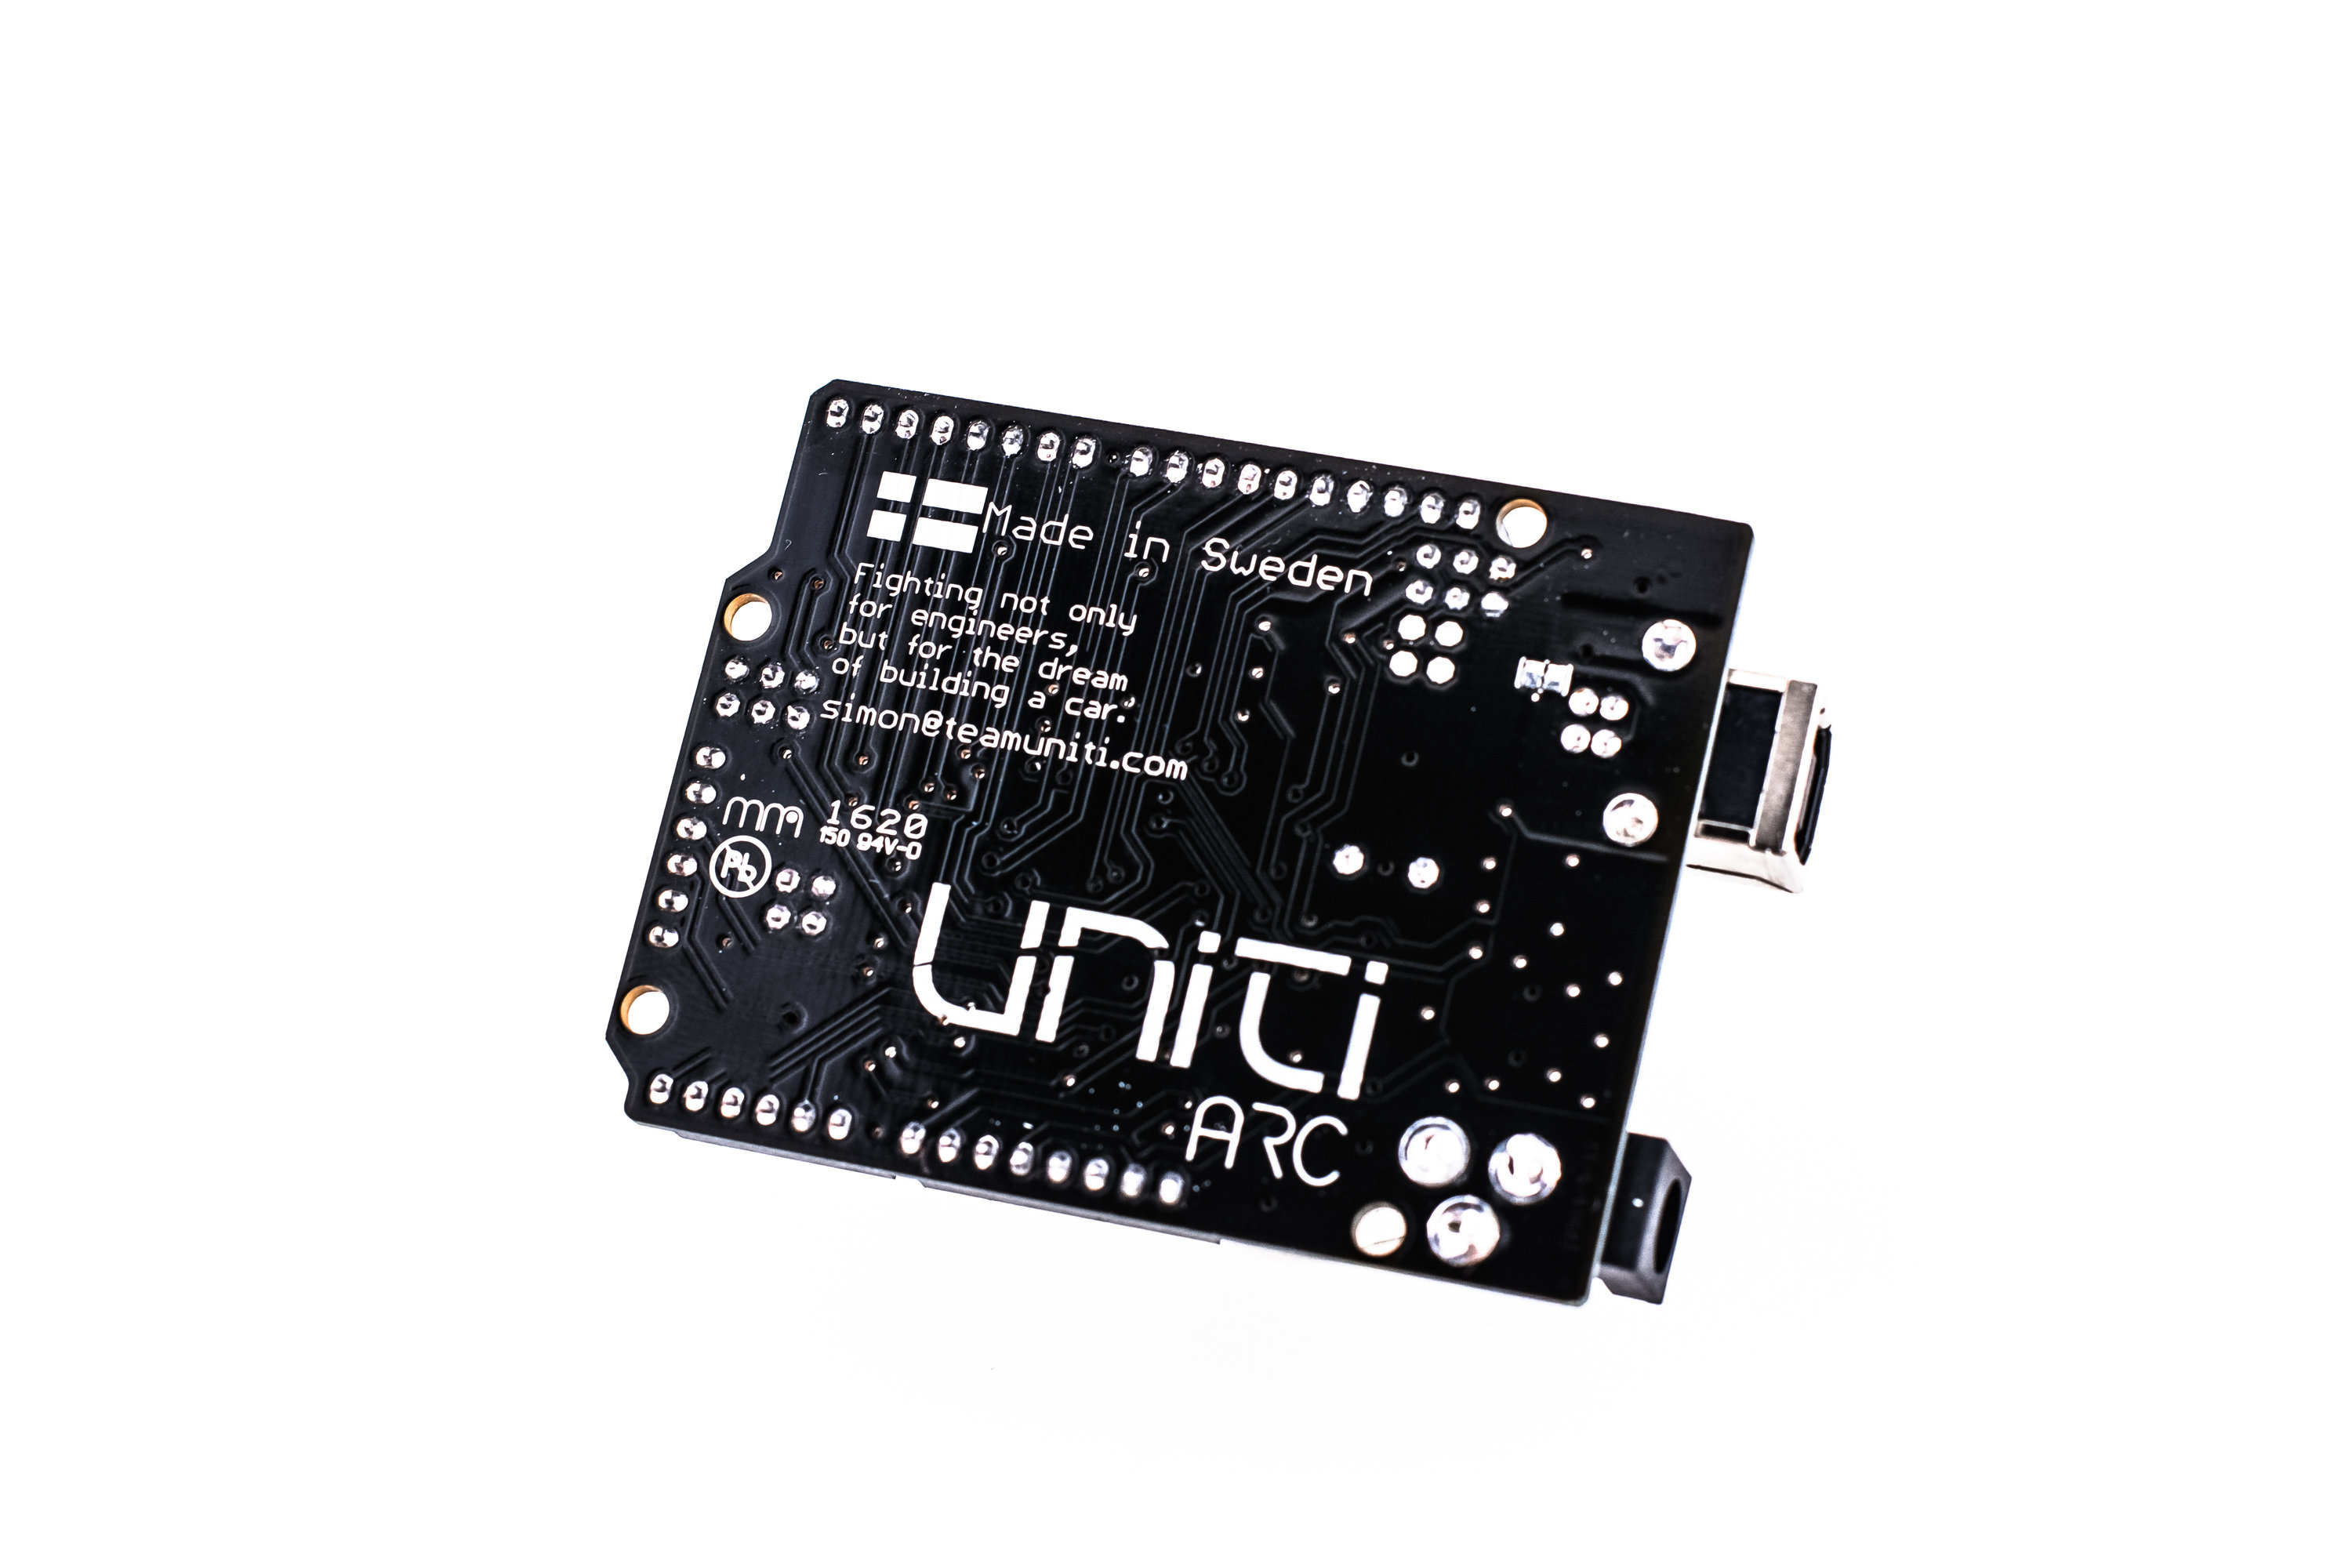 tech startup uniti releases open source microcontroller to support the